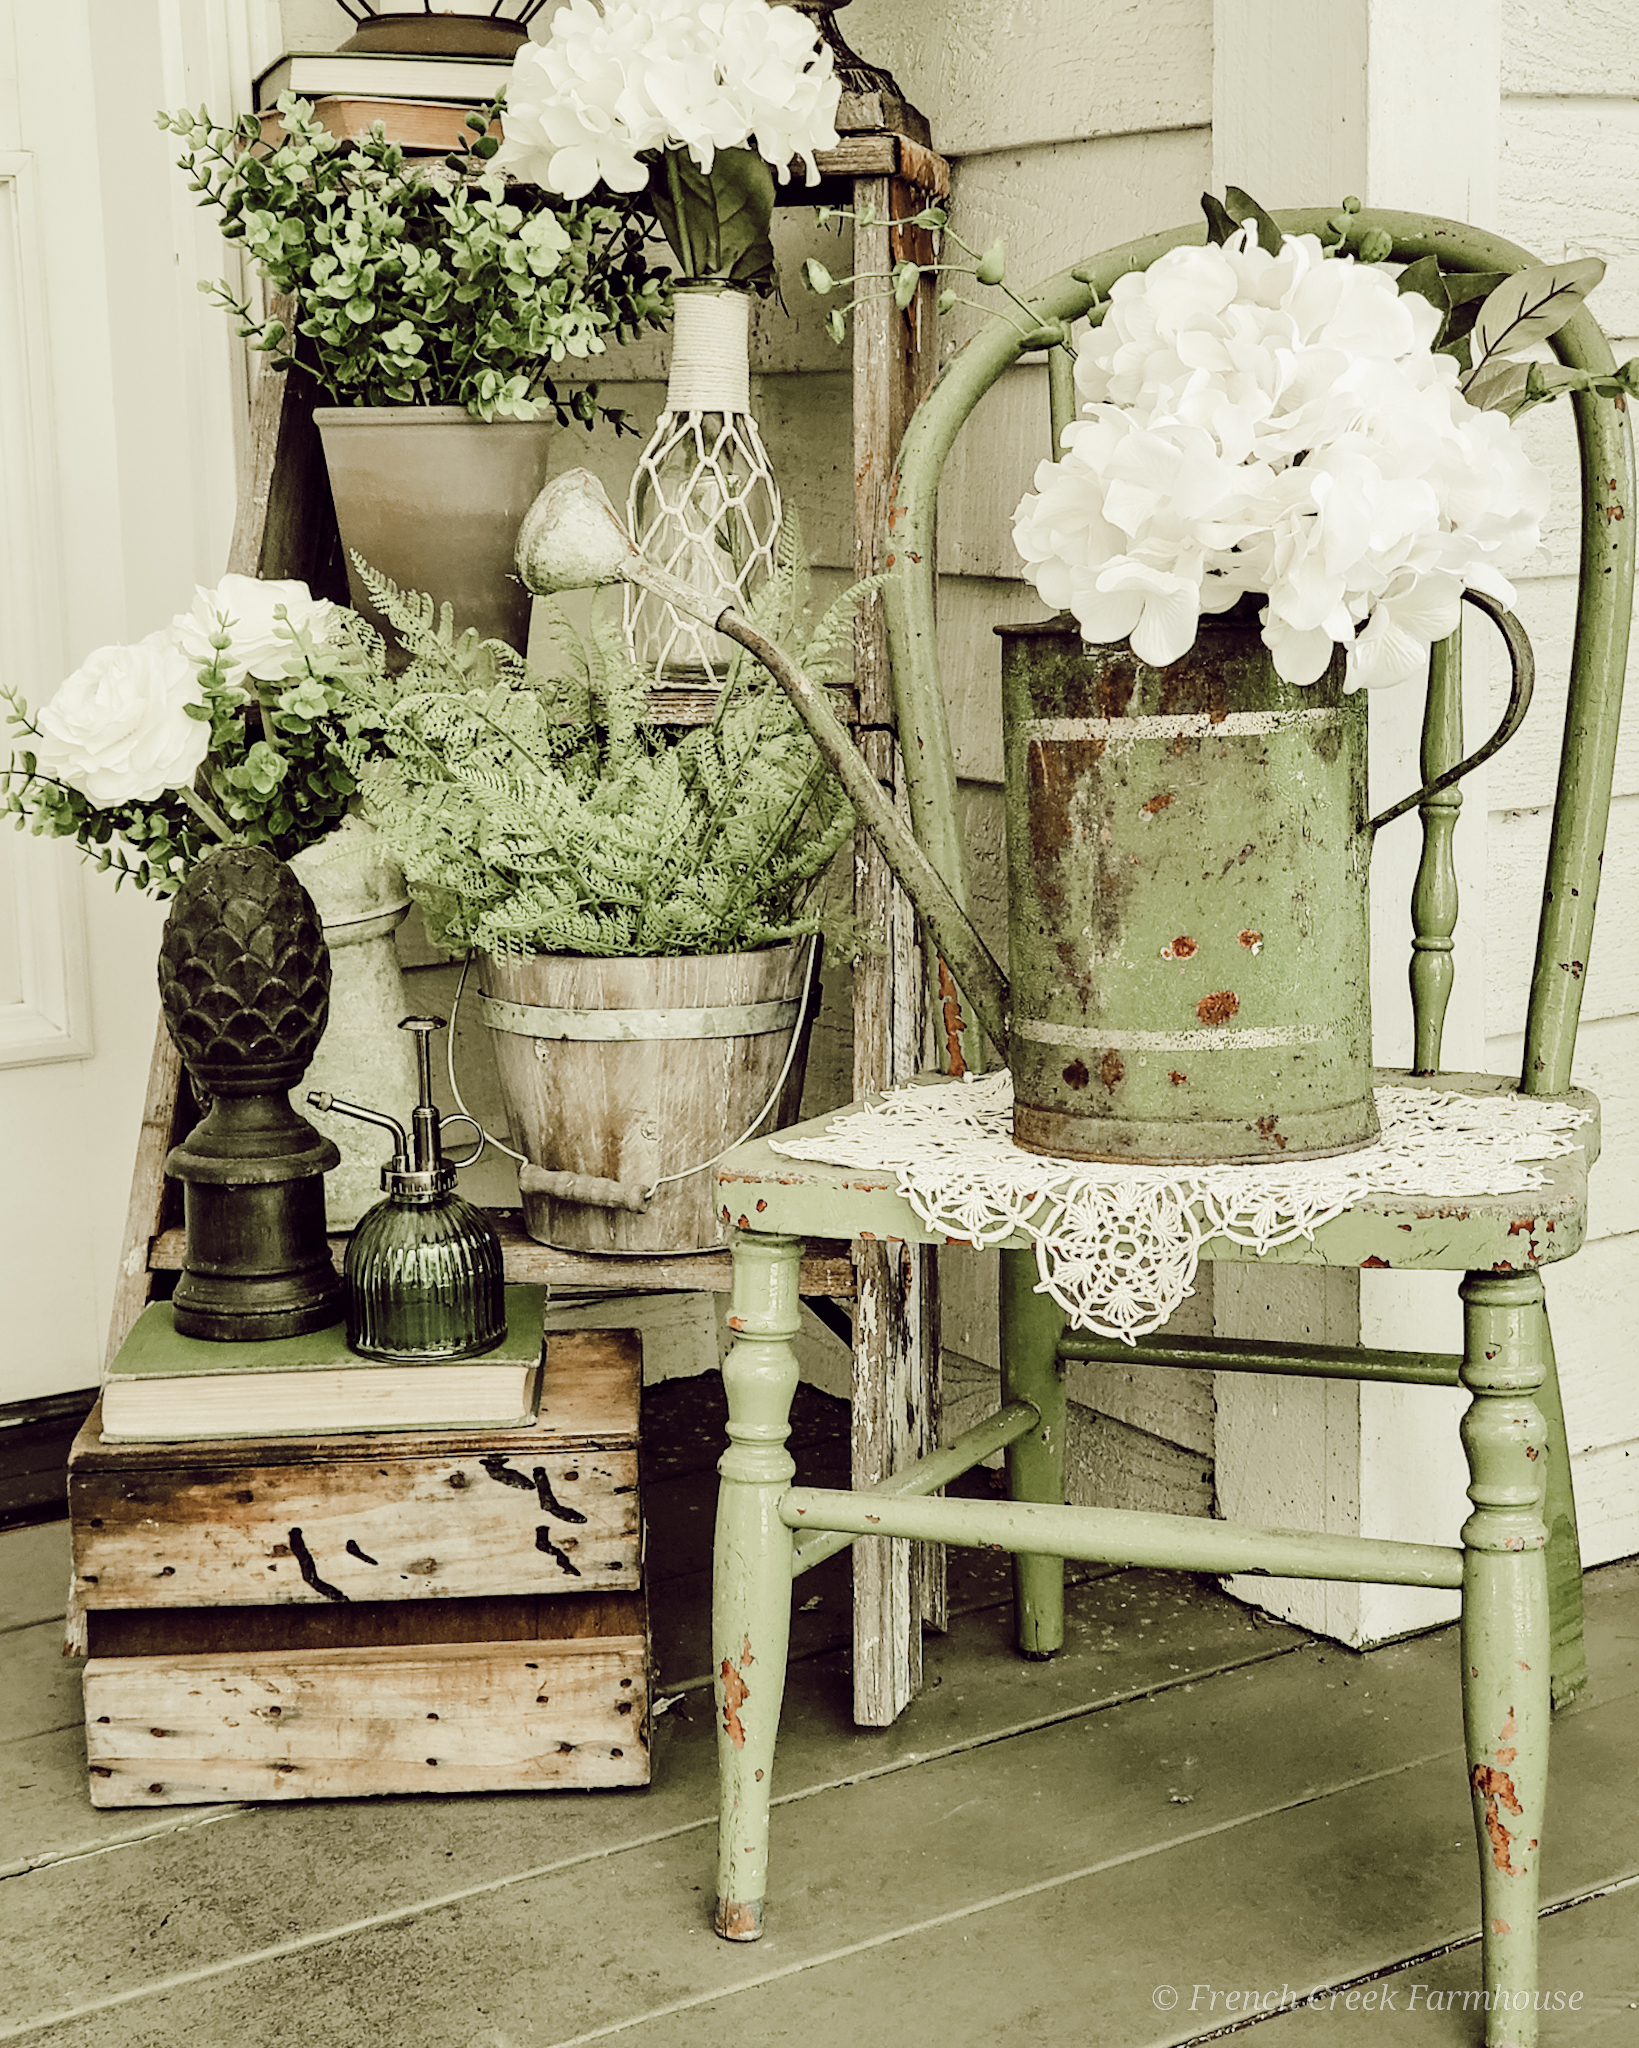 This springtime front porch vignette features a vintage watering can, chippy green chair, rustic old stepladder, and loads of spring florals